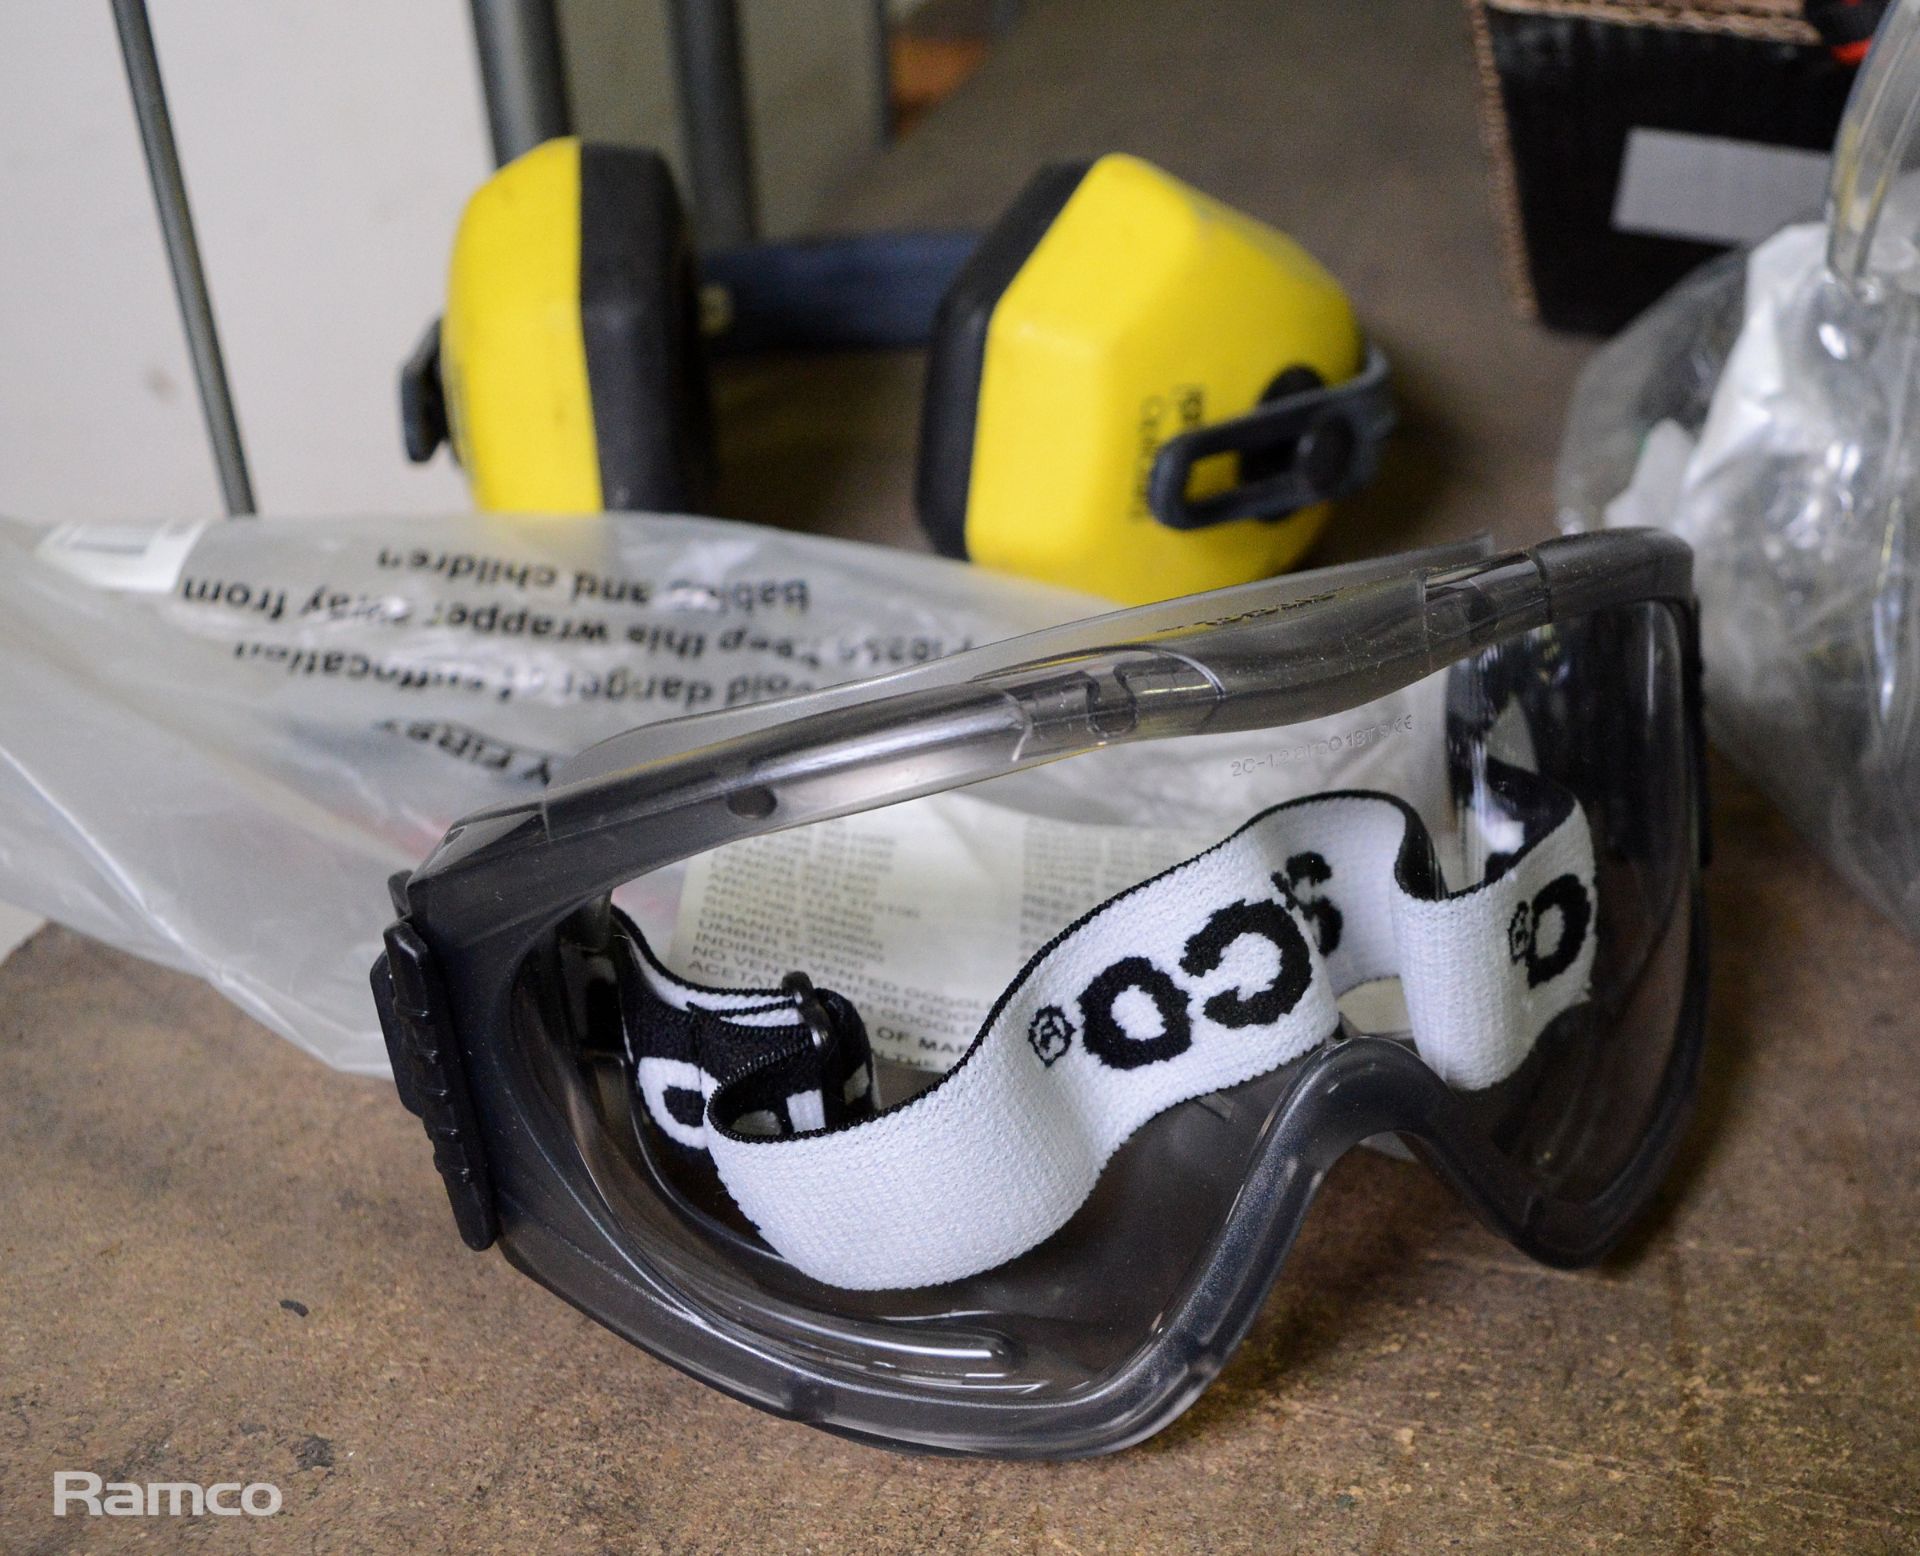 Workwear assortment - Hard hats, ear defenders, safety goggles, dust masks, gloves - Image 6 of 6